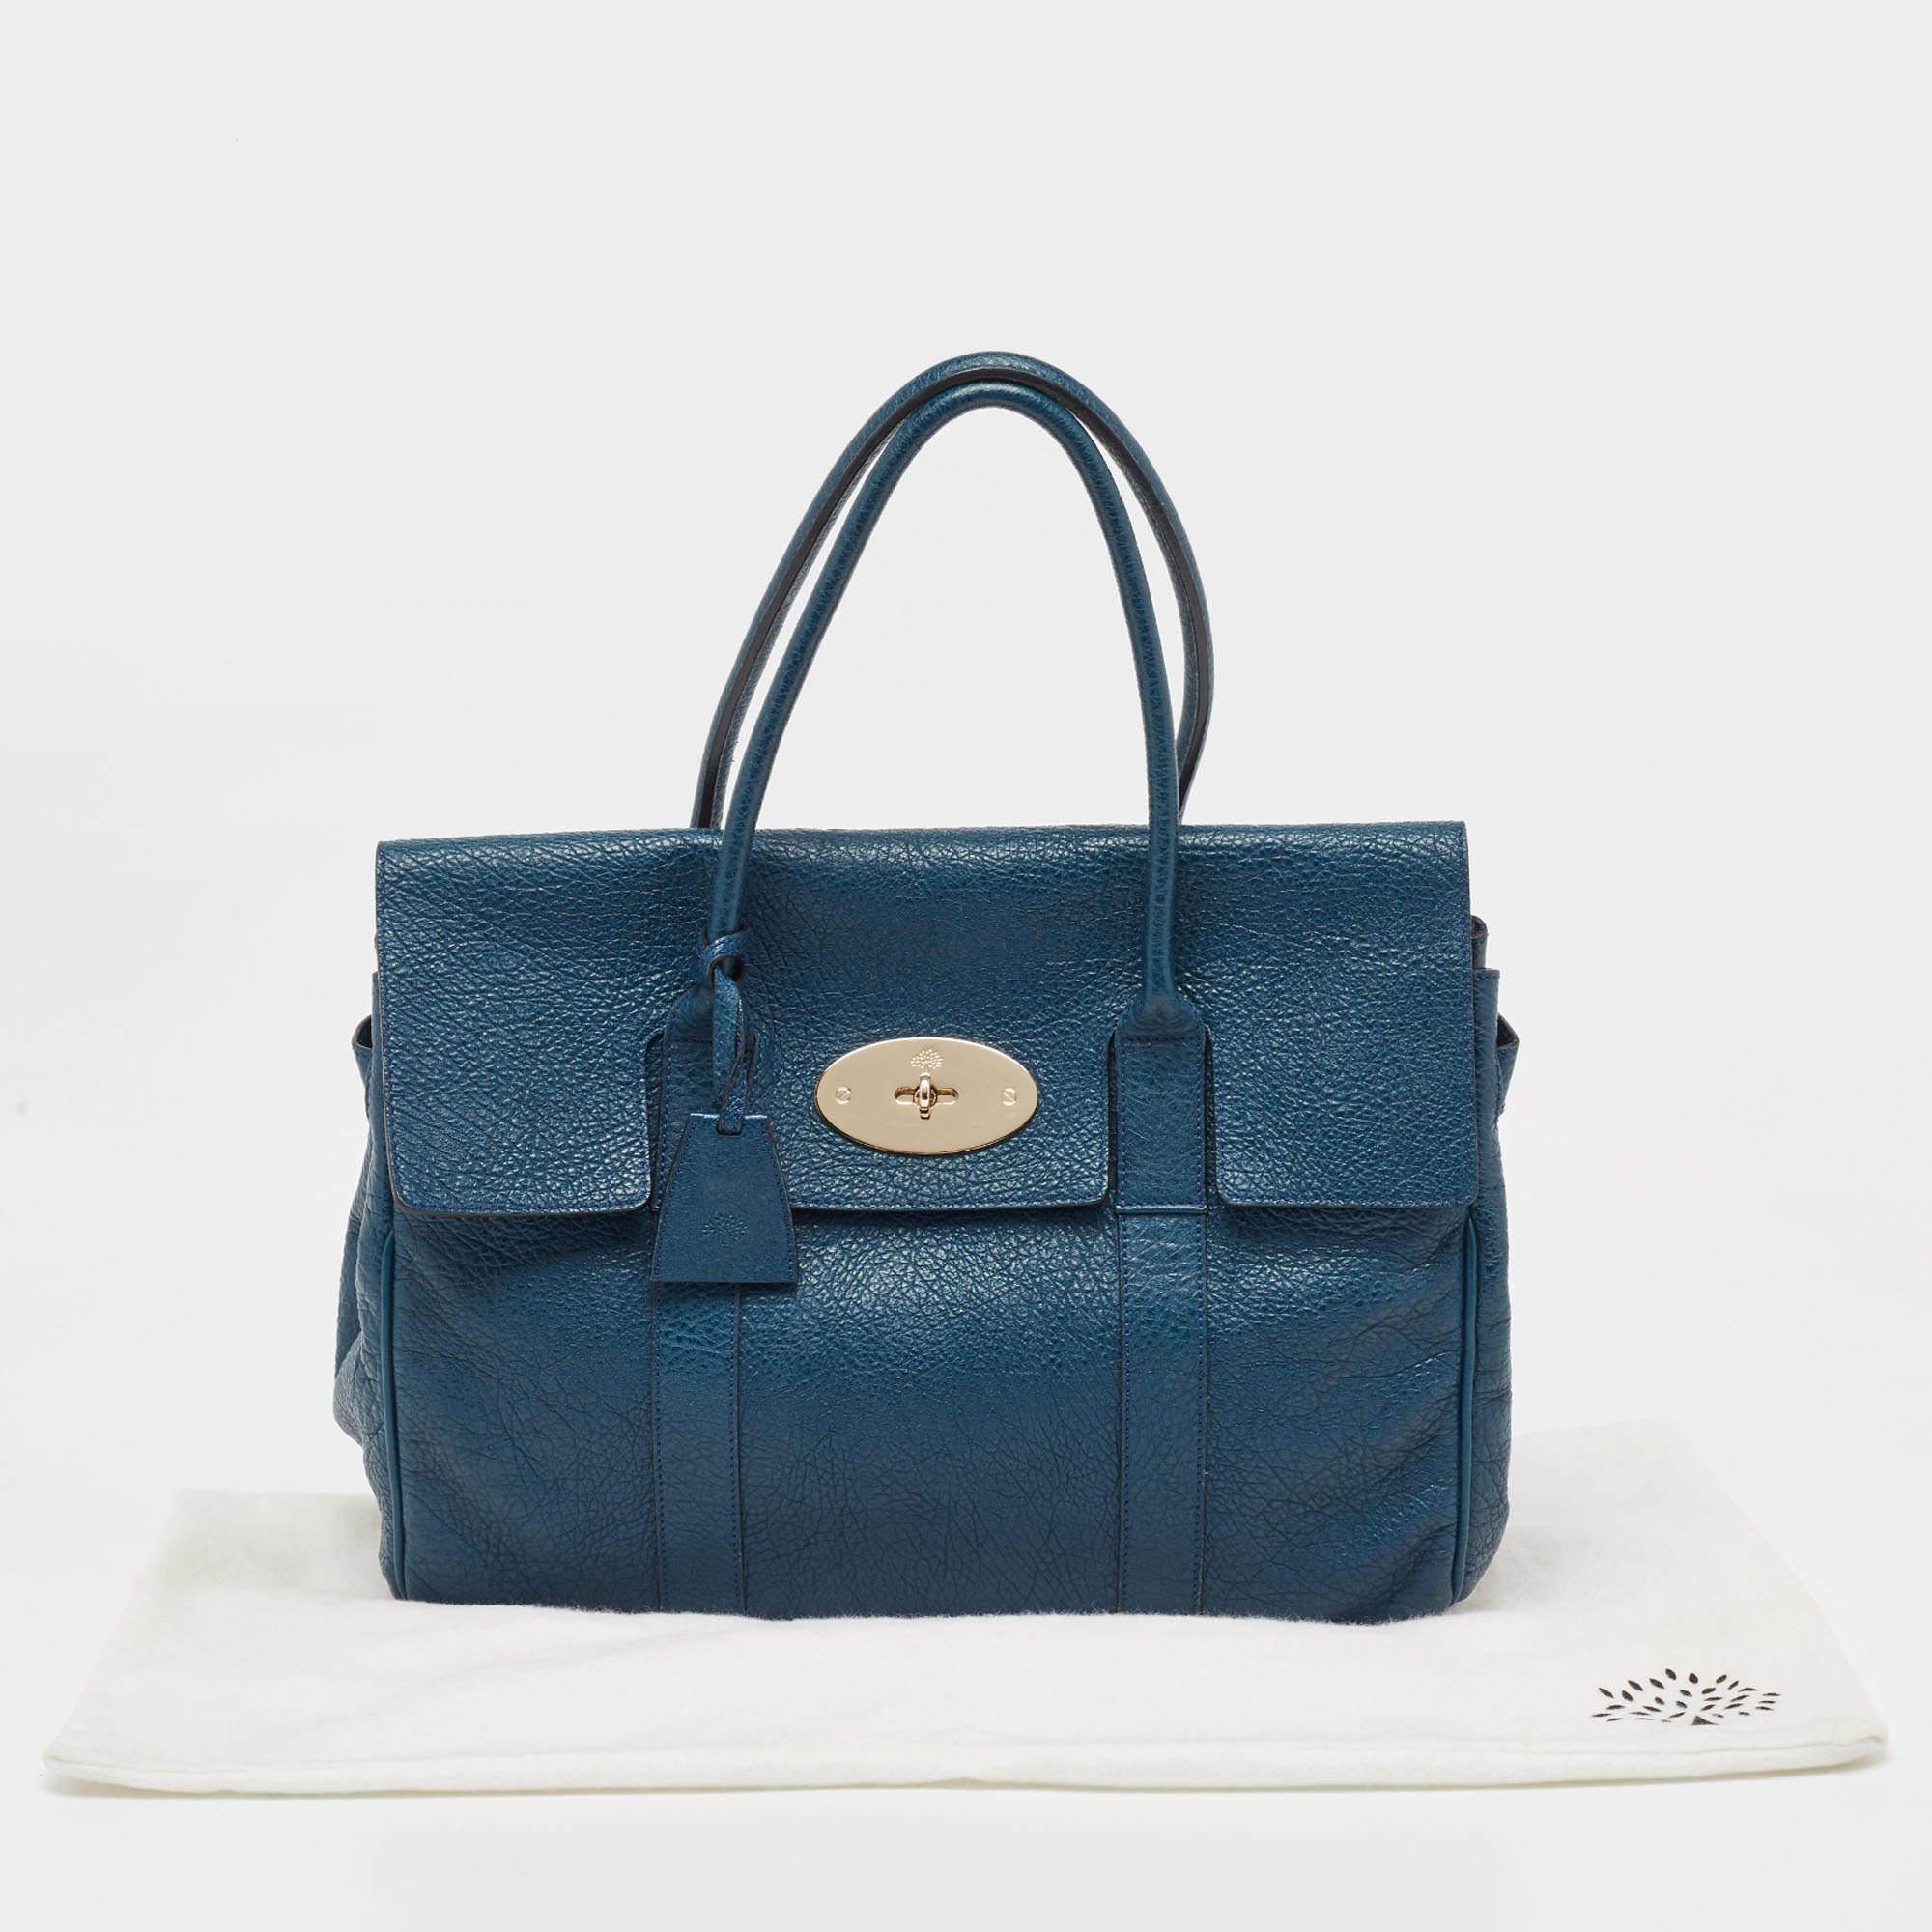 Mulberry Teal Blue Leather Bayswater Satchel For Sale 15